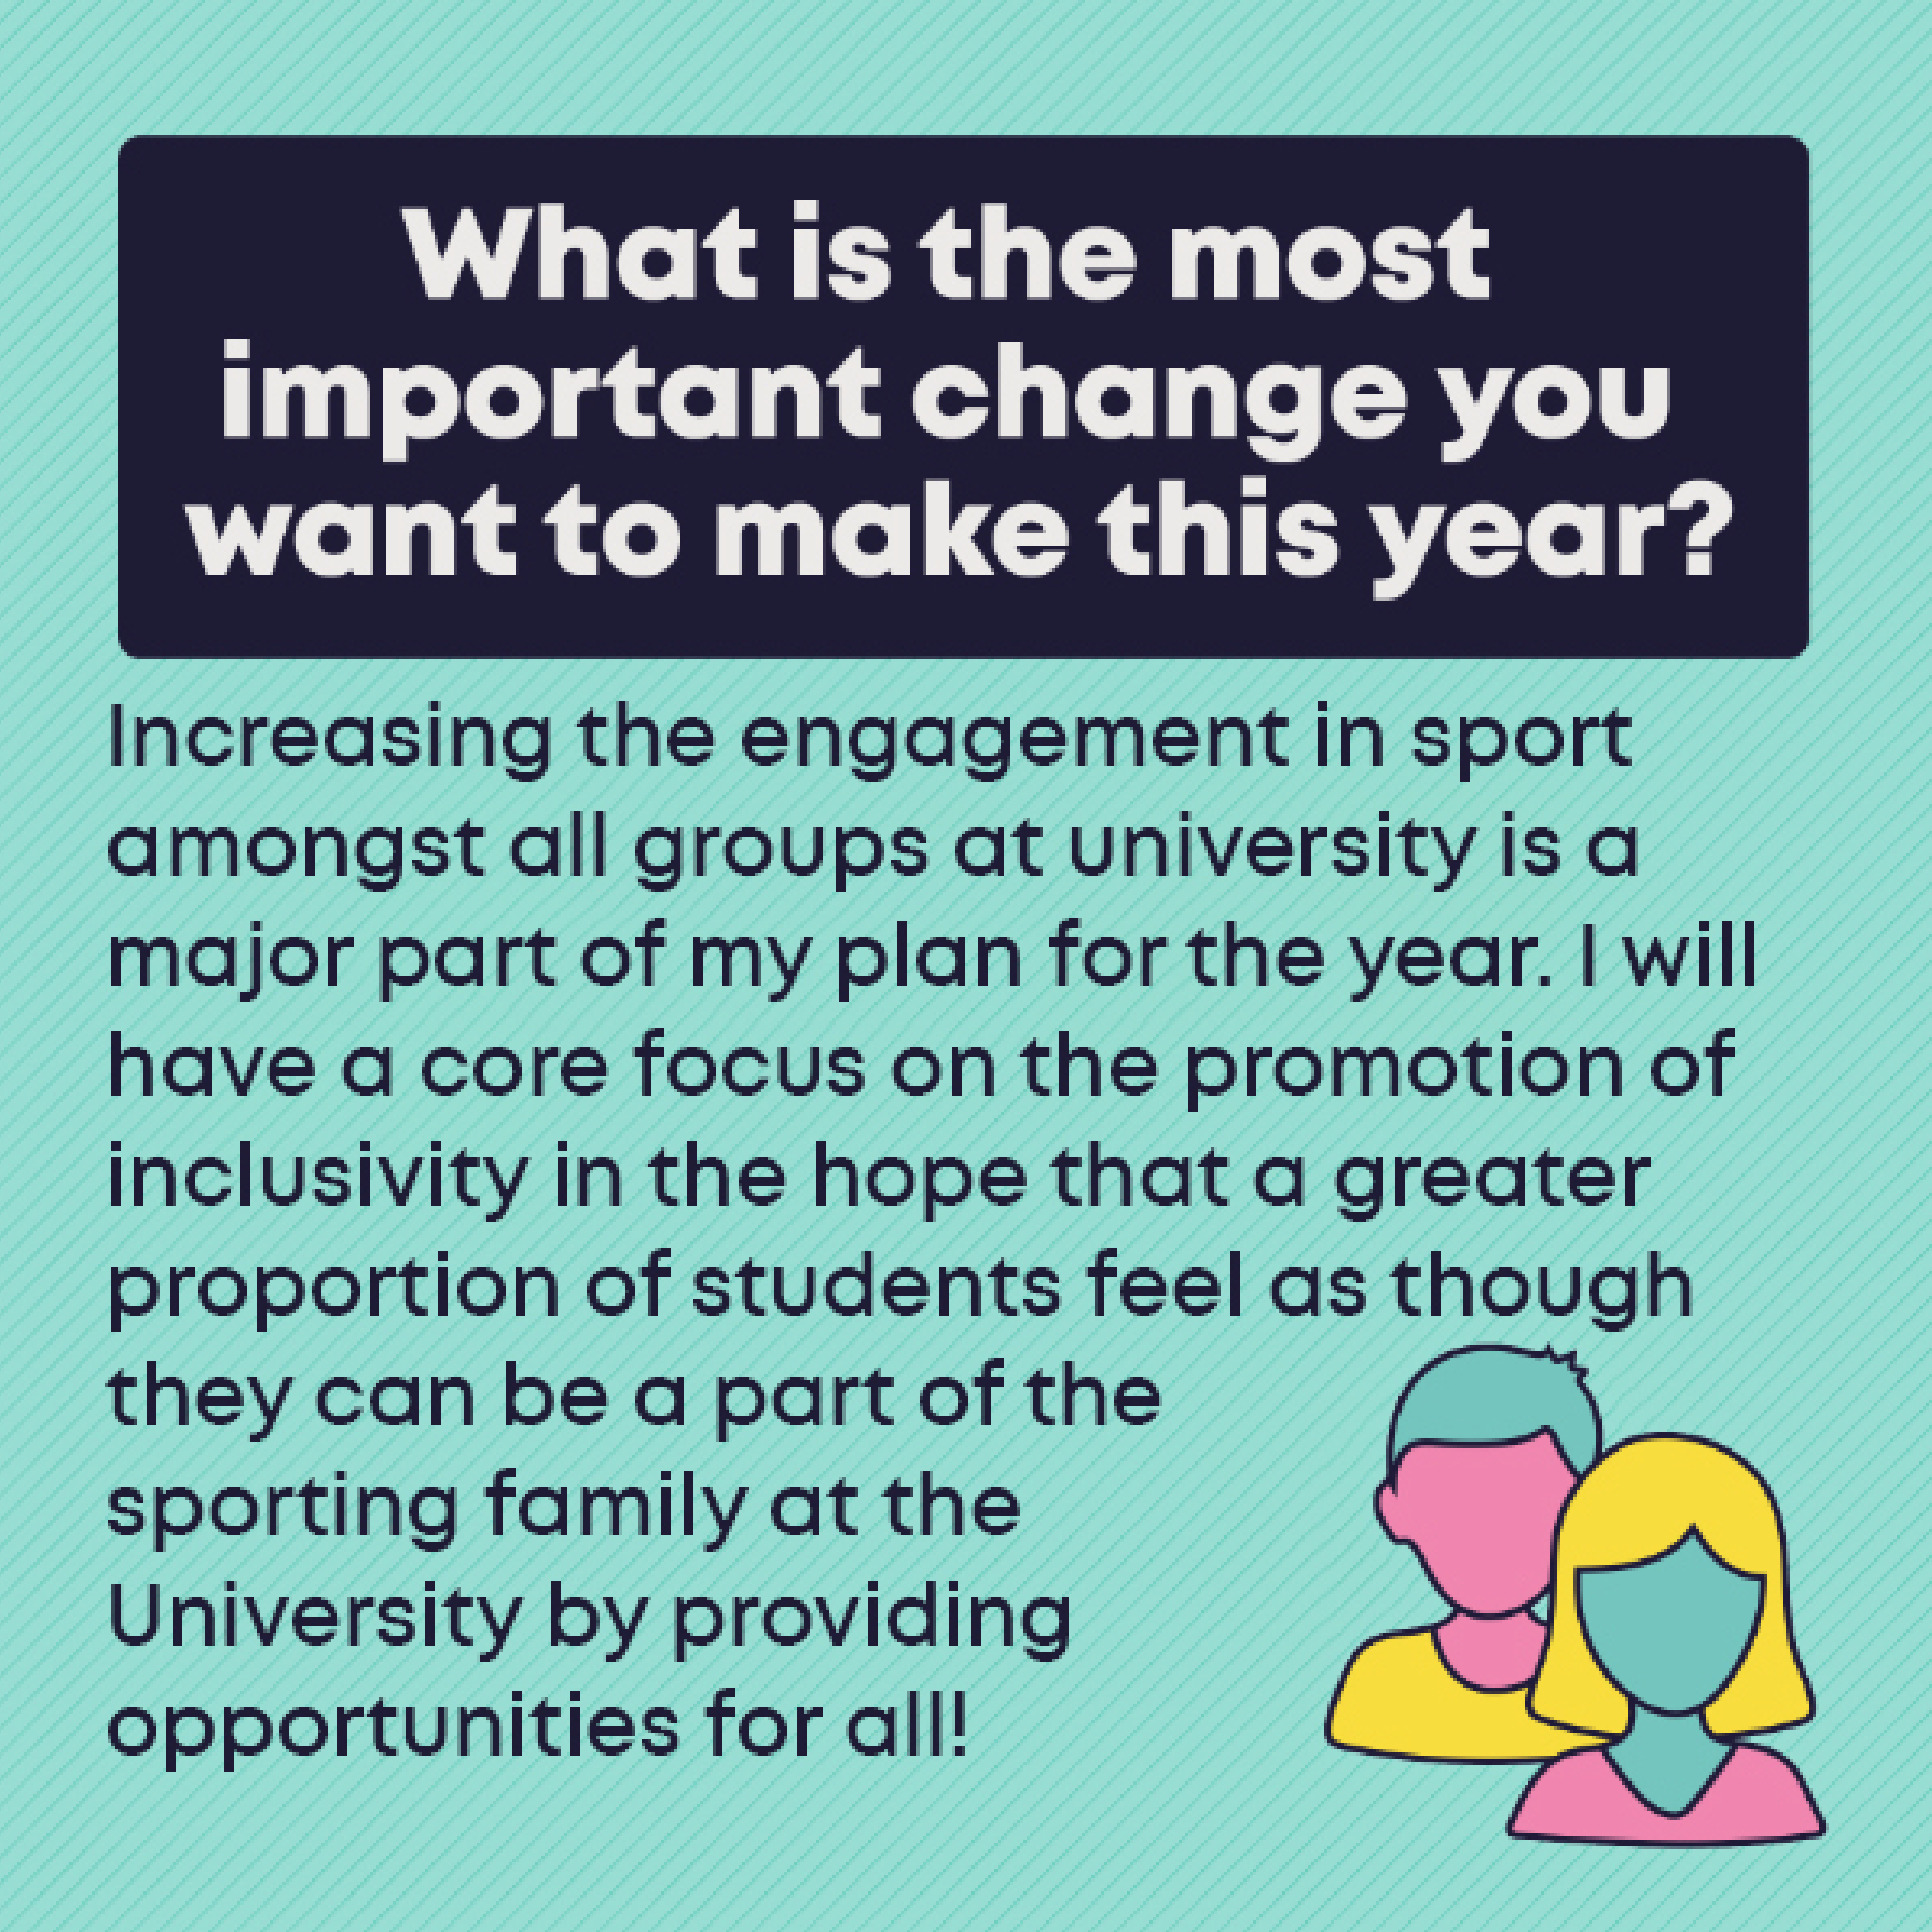 What is the most important change you want to make this year? Increasing the engagement in sport amongst all groups at university is a major part of my plan for the year. I will have a core focus on the promotion of inclusivity in the hope that a greater proportion of students feel as though they can be a part of the sporting family at the University by providing opportunities for all!